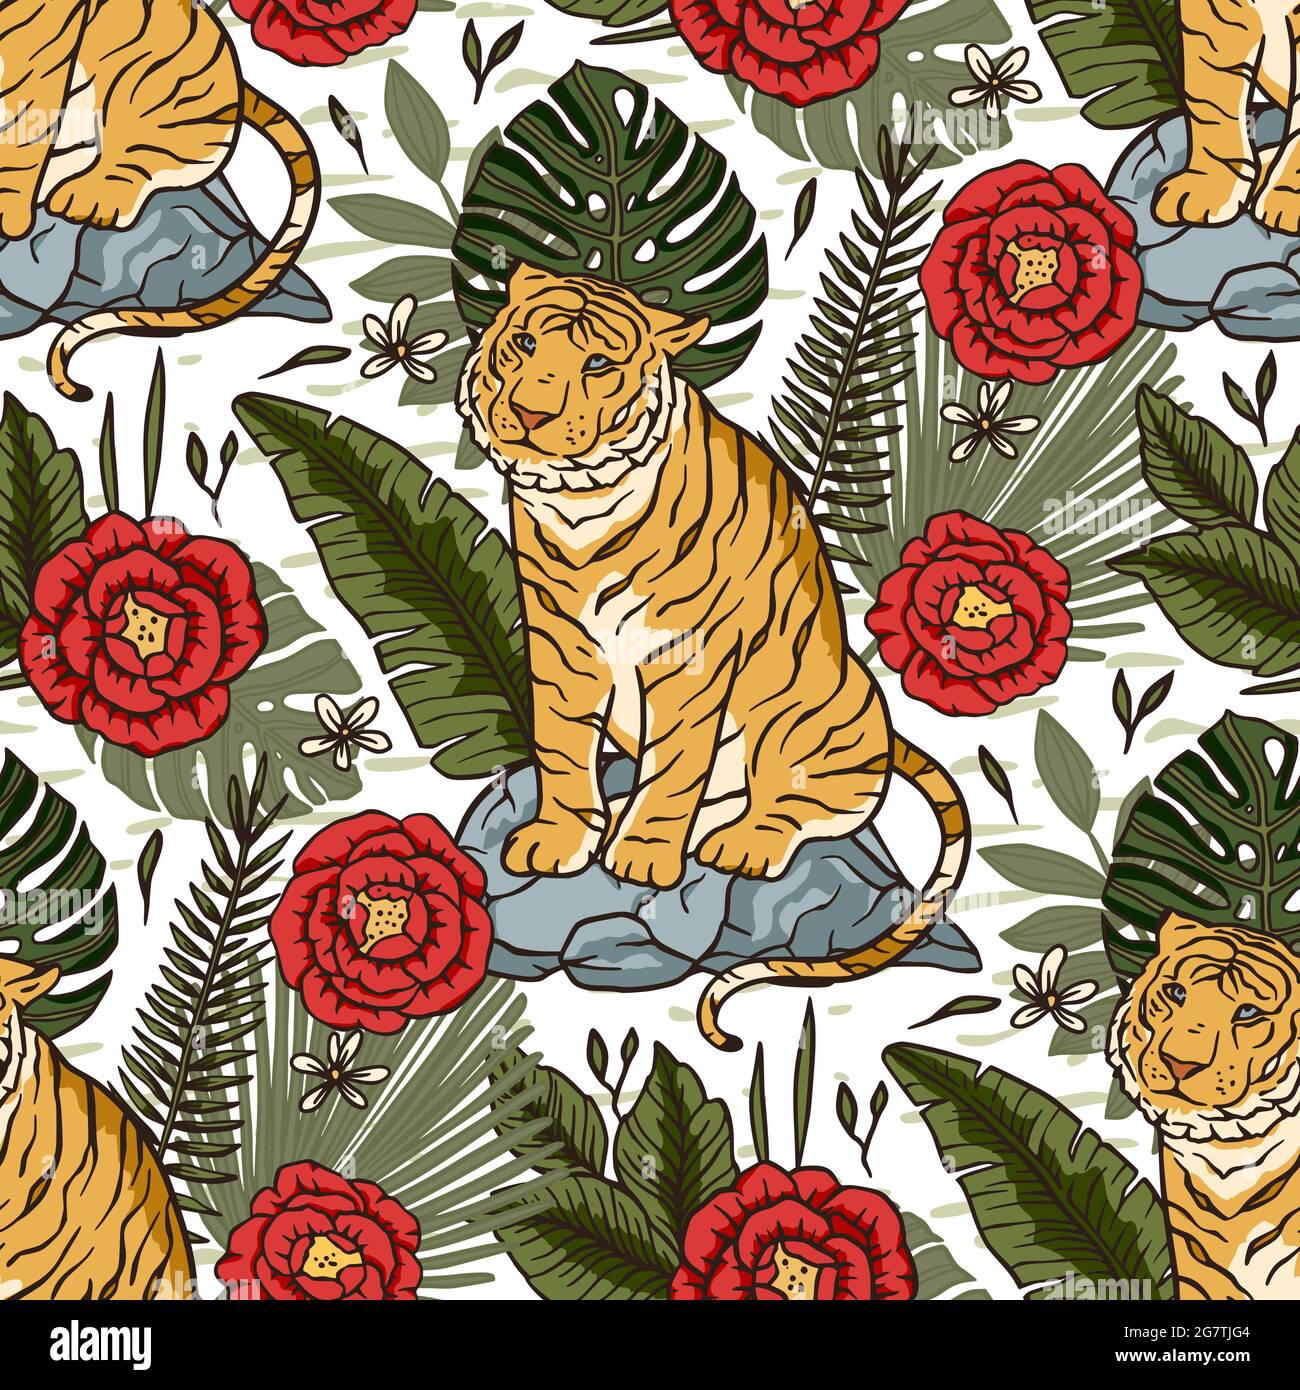 Jungle tiger exotic tropical seamless pattern with rose flower. Animal ...